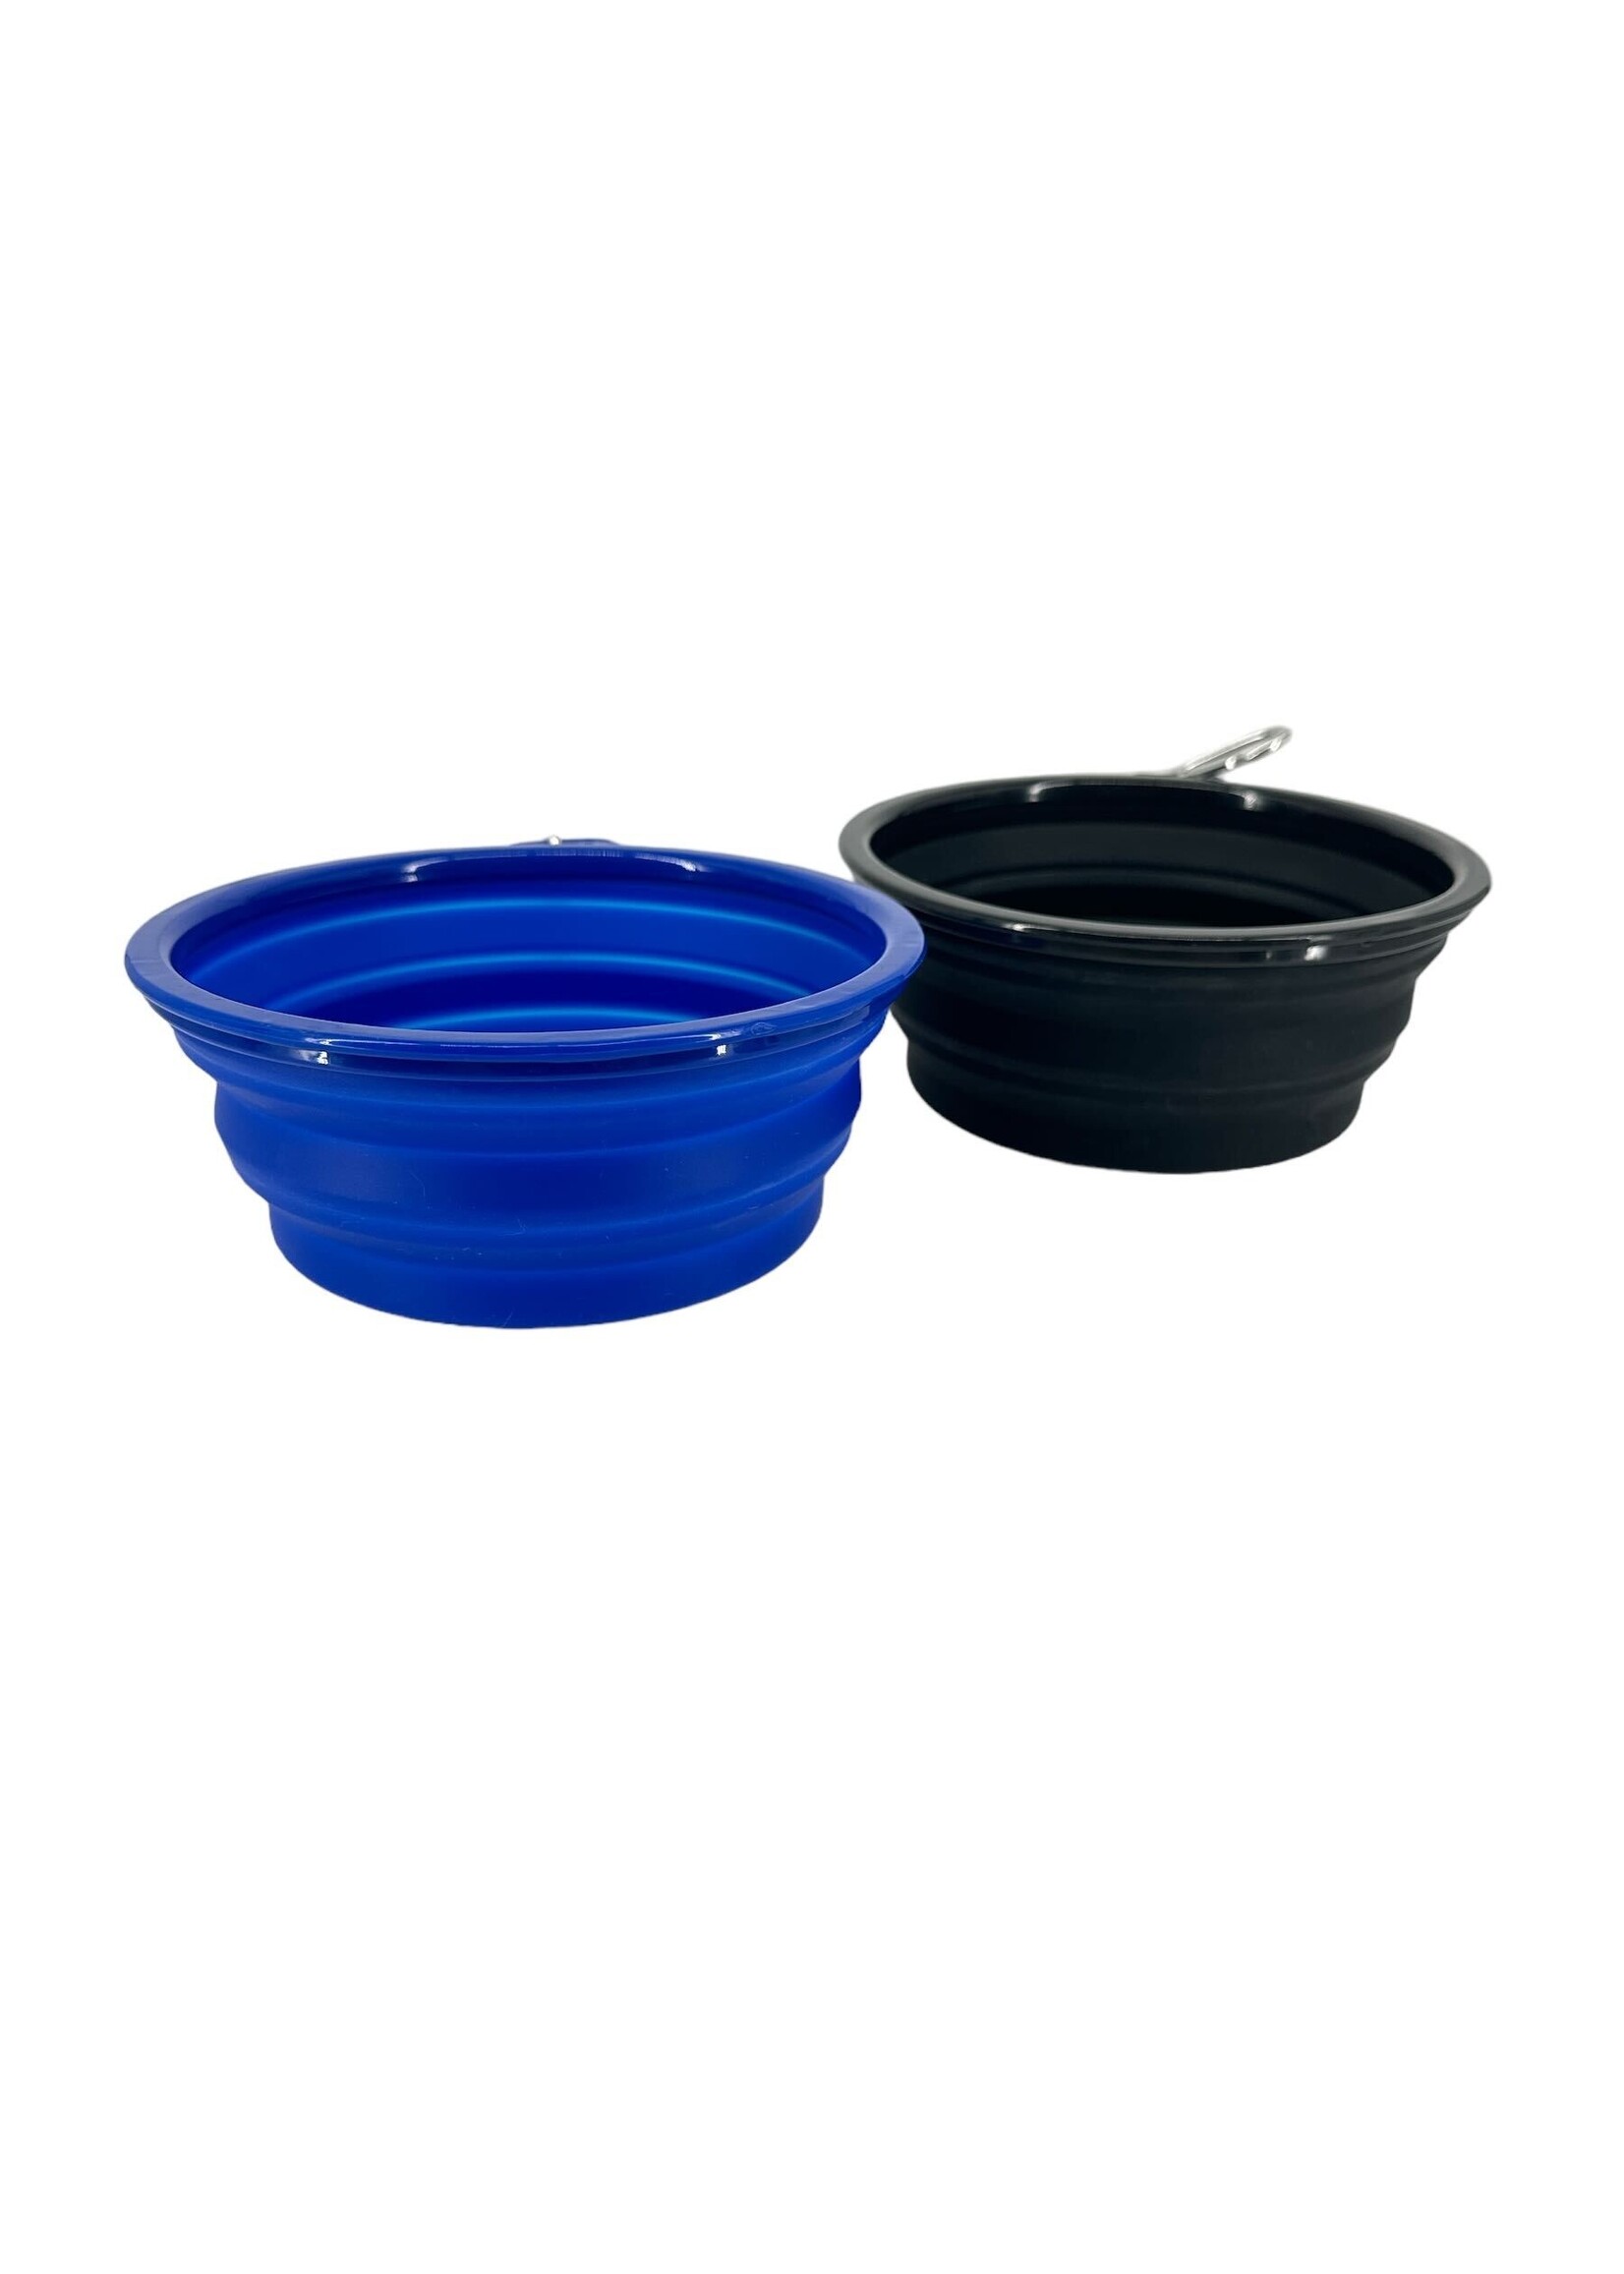 Collapsible travel bowl with carabiner